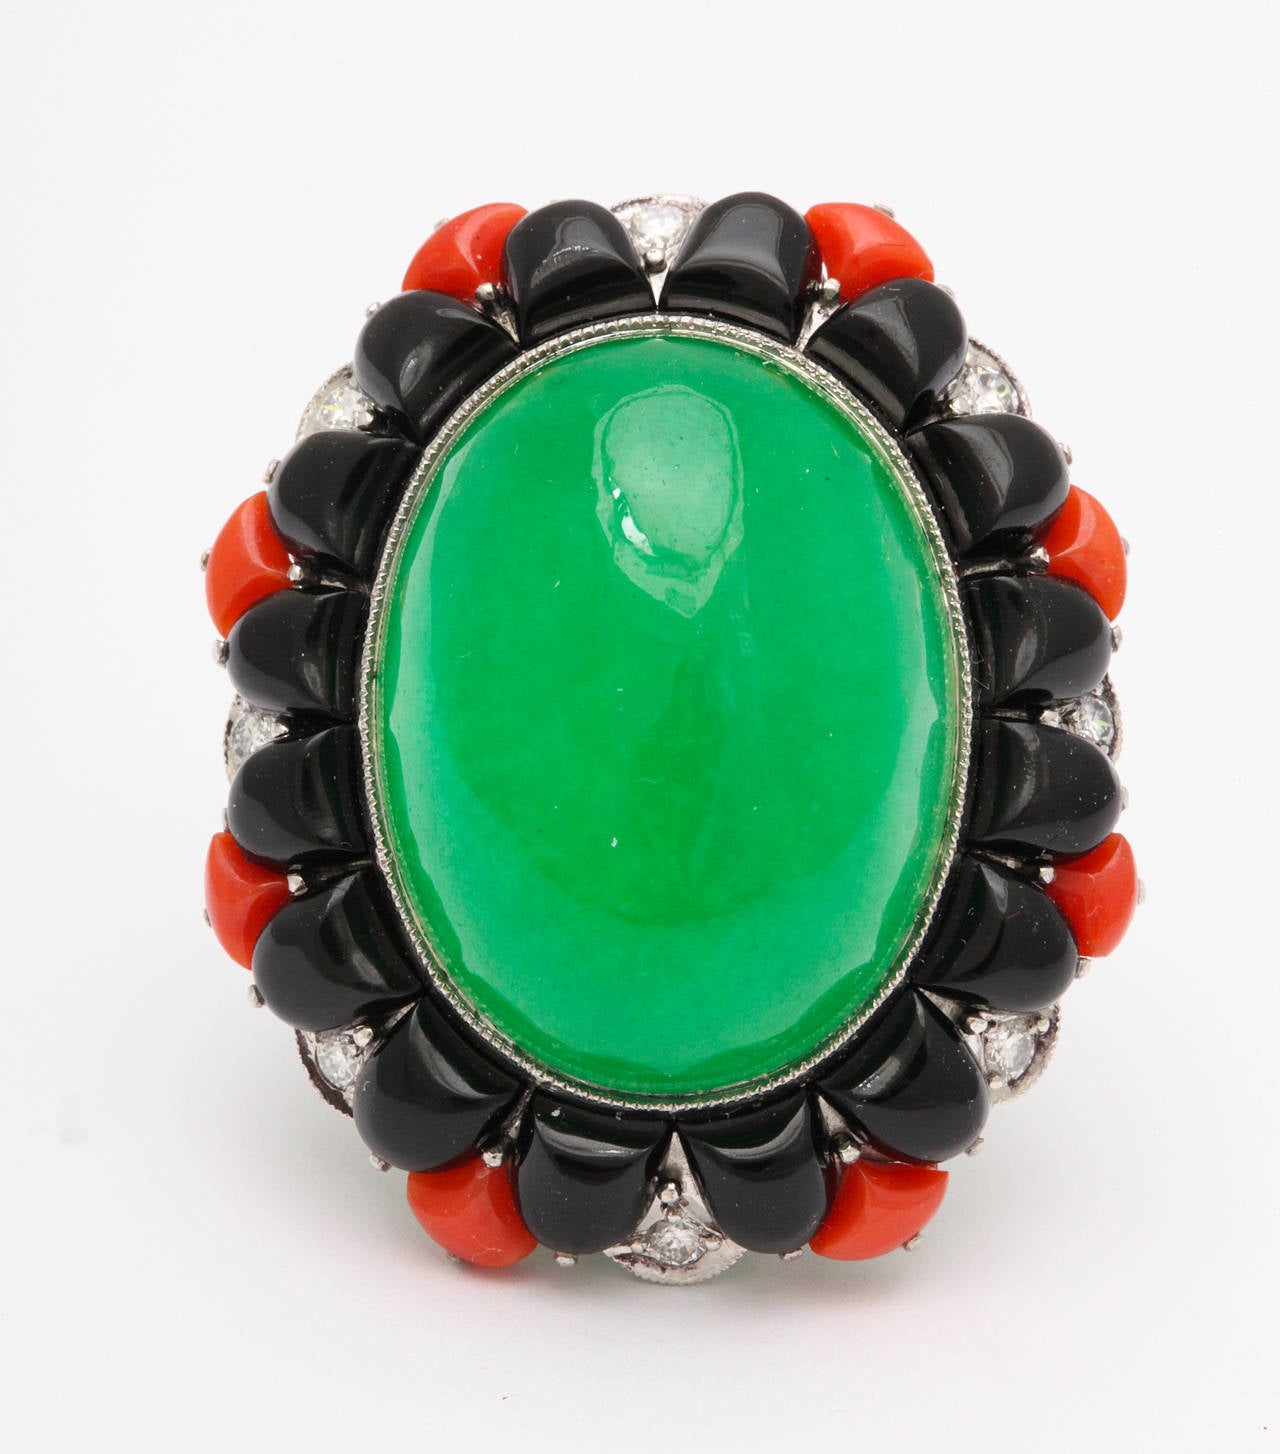 A striking ring of 18K white gold, featuring a large central cabochon of enhanced green jadeite jade, surrounded by triangular cabochons of onyx and coral, with 8 nearly colorless round brilliant cut diamonds, and 8 smaller diamonds on the shank.